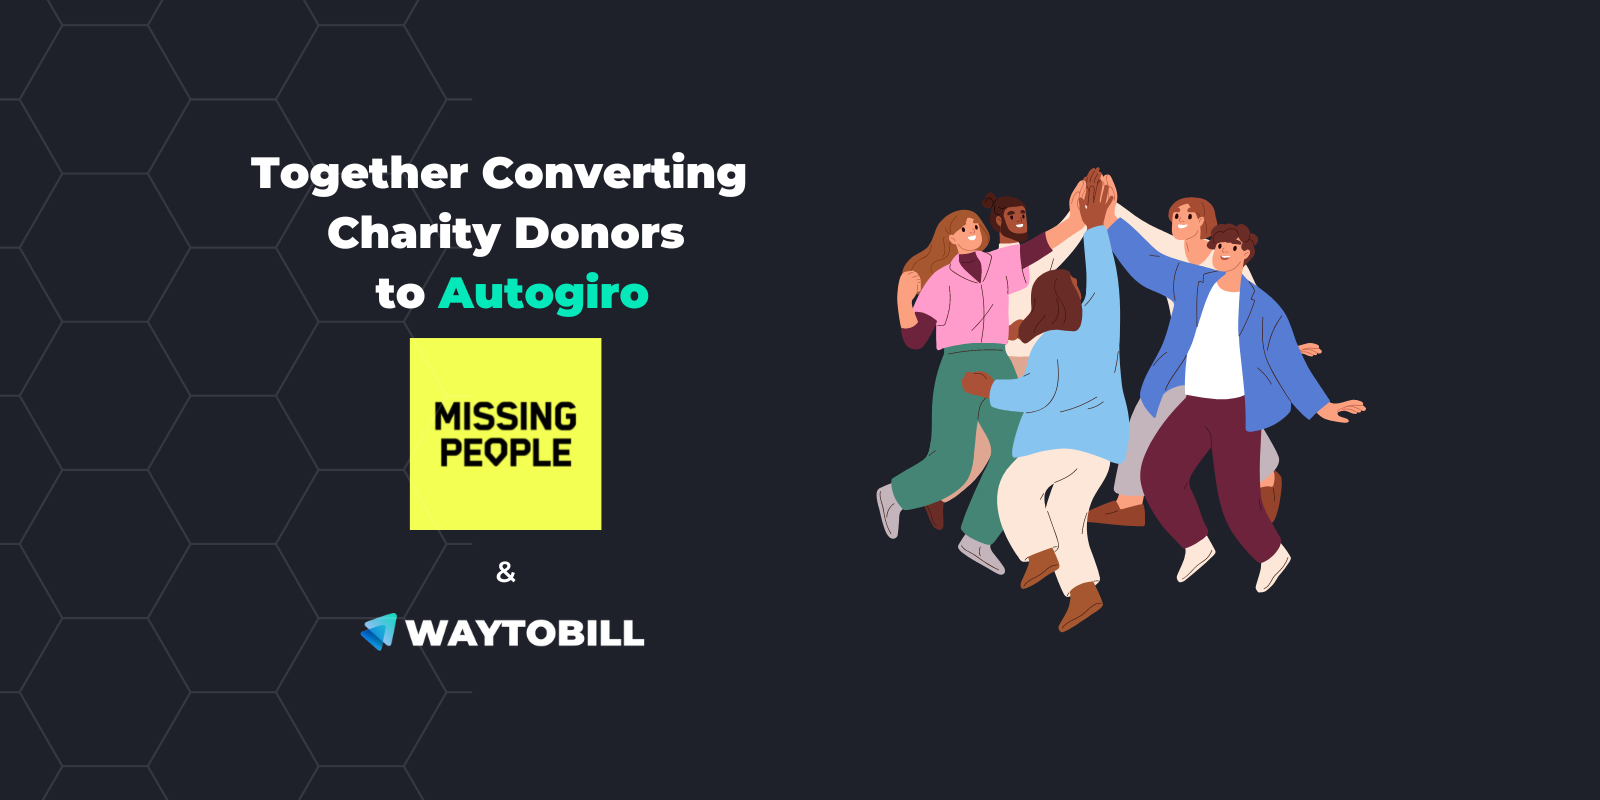 How Waytobill and Missing People Convert Autogiro Donors via Telesales